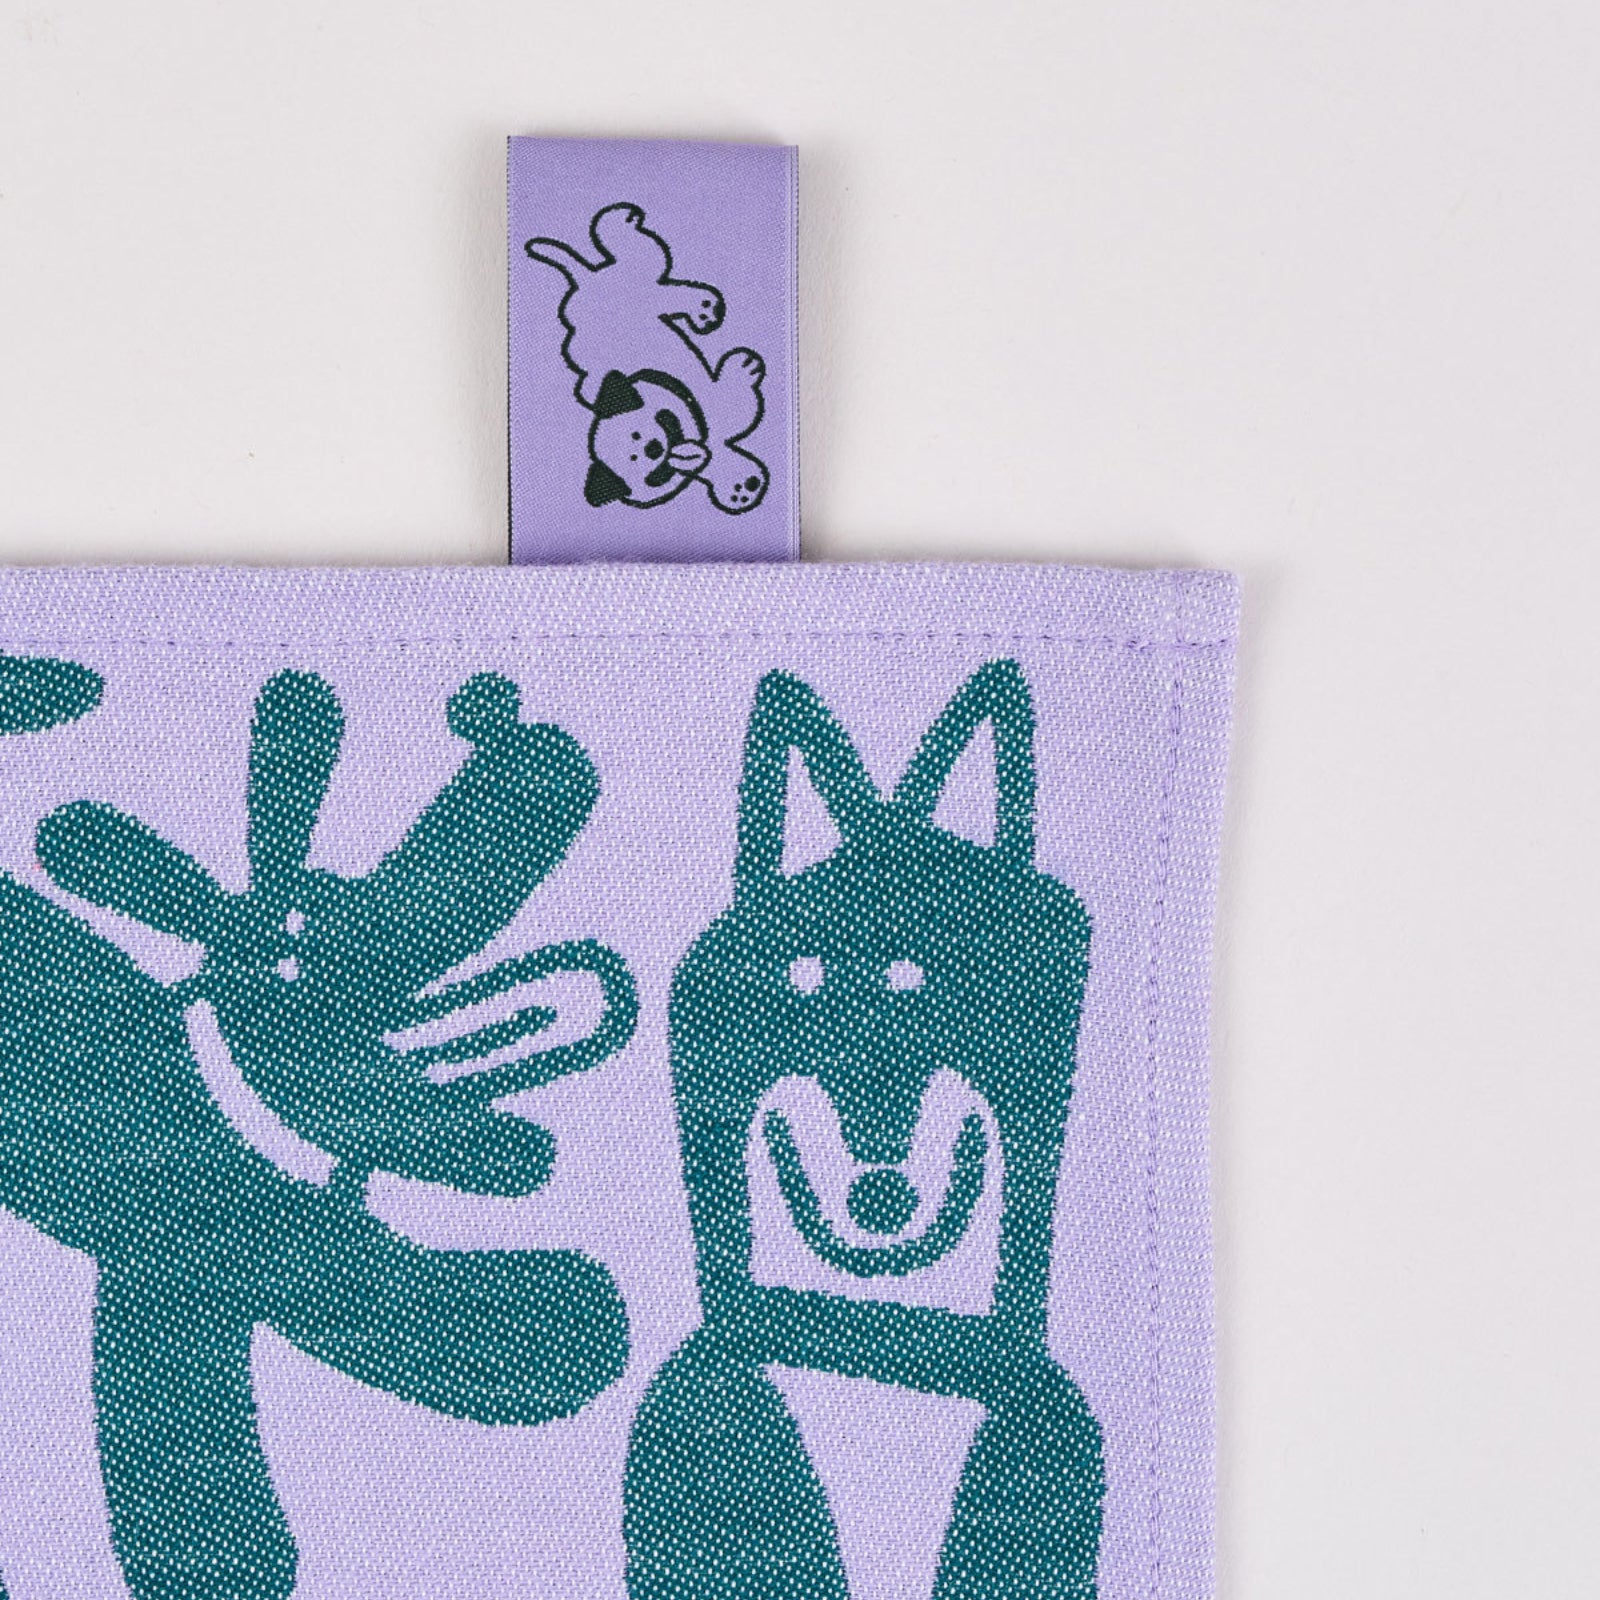 'Dogs Day Out' Tea Towel - Lilac/Green